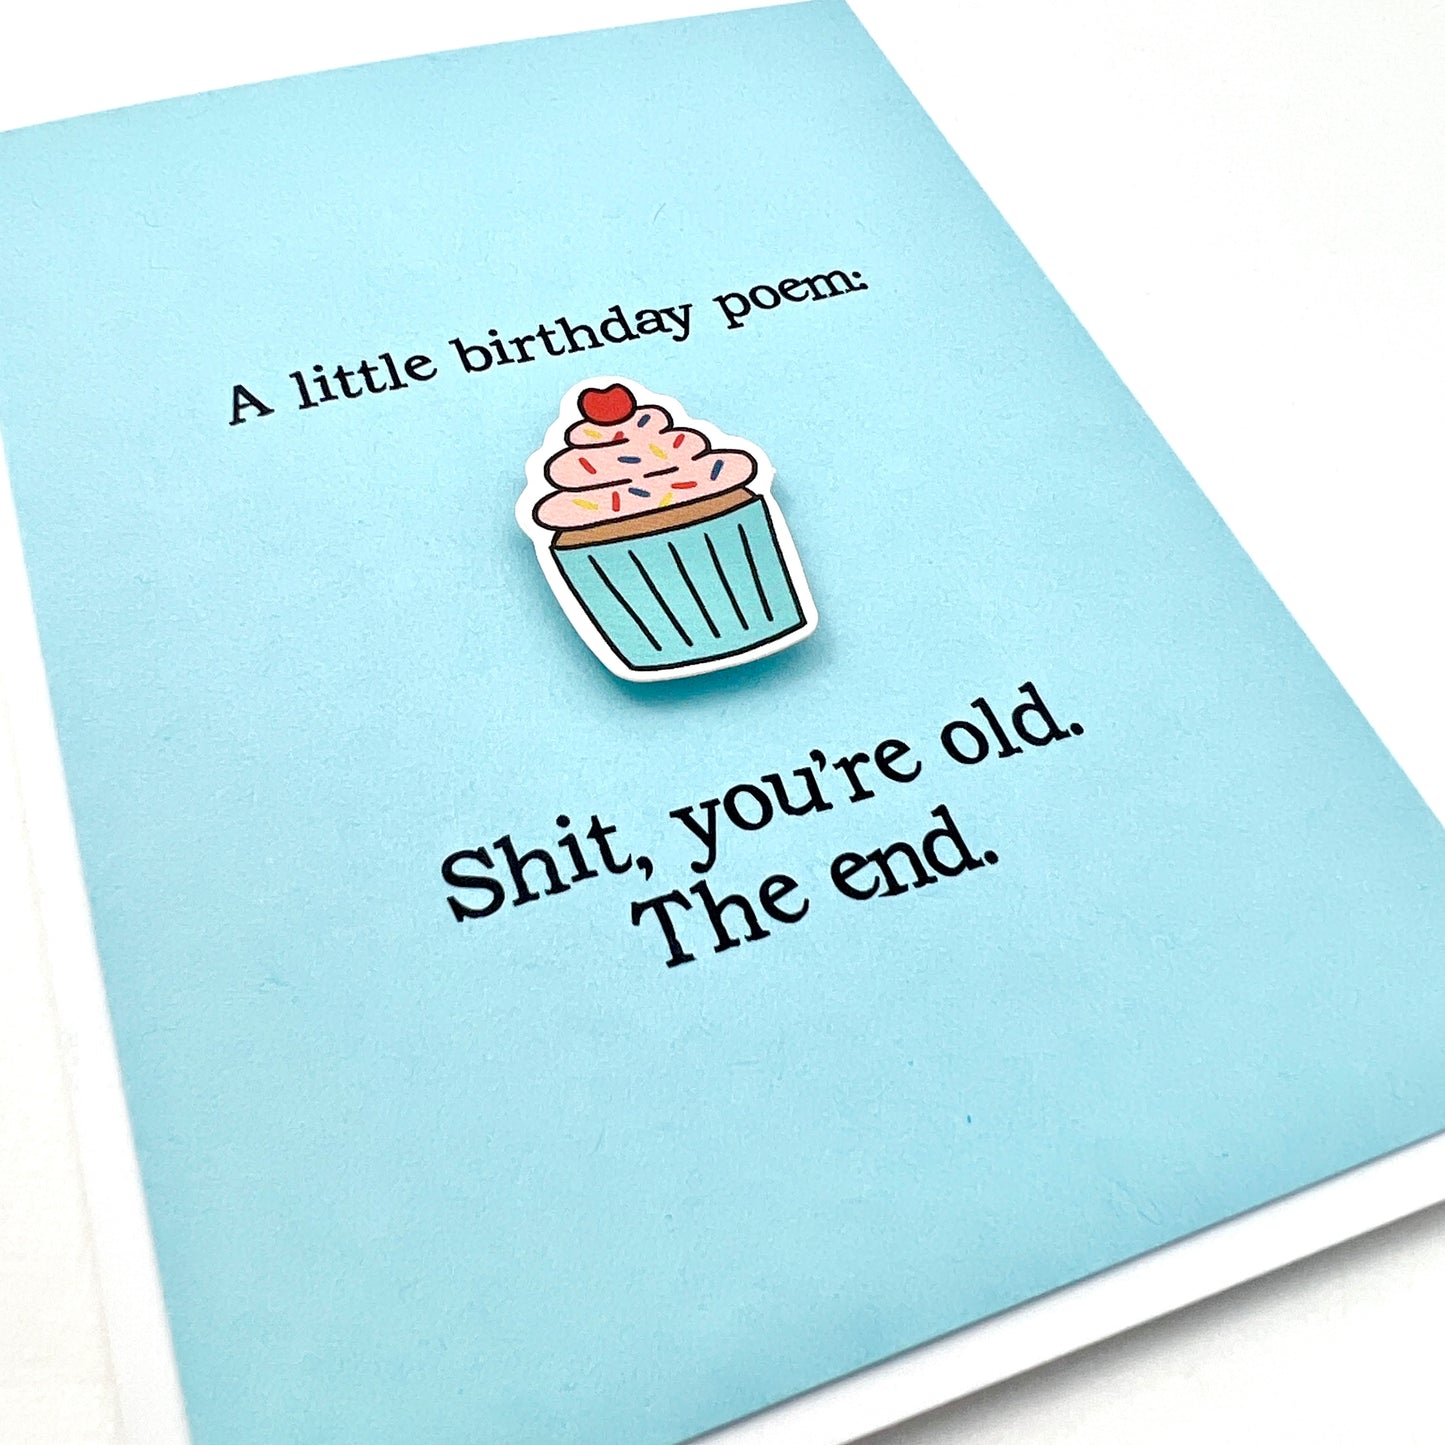 Birthday Poem Shit You’re Old card